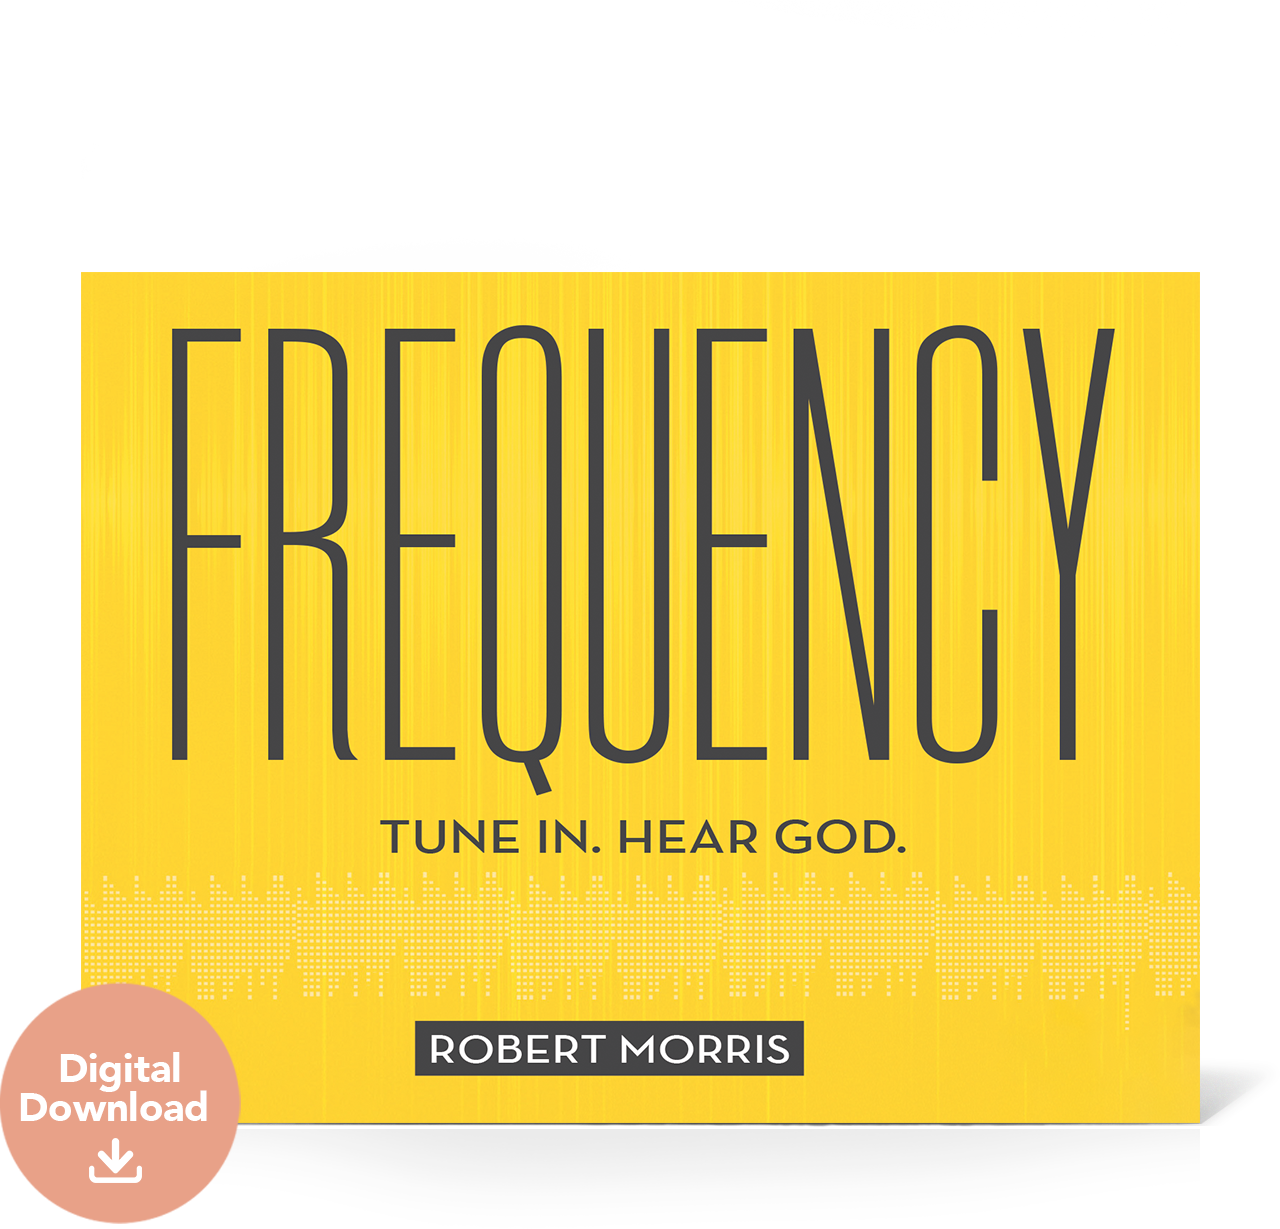 Frequency Audio Digital Download